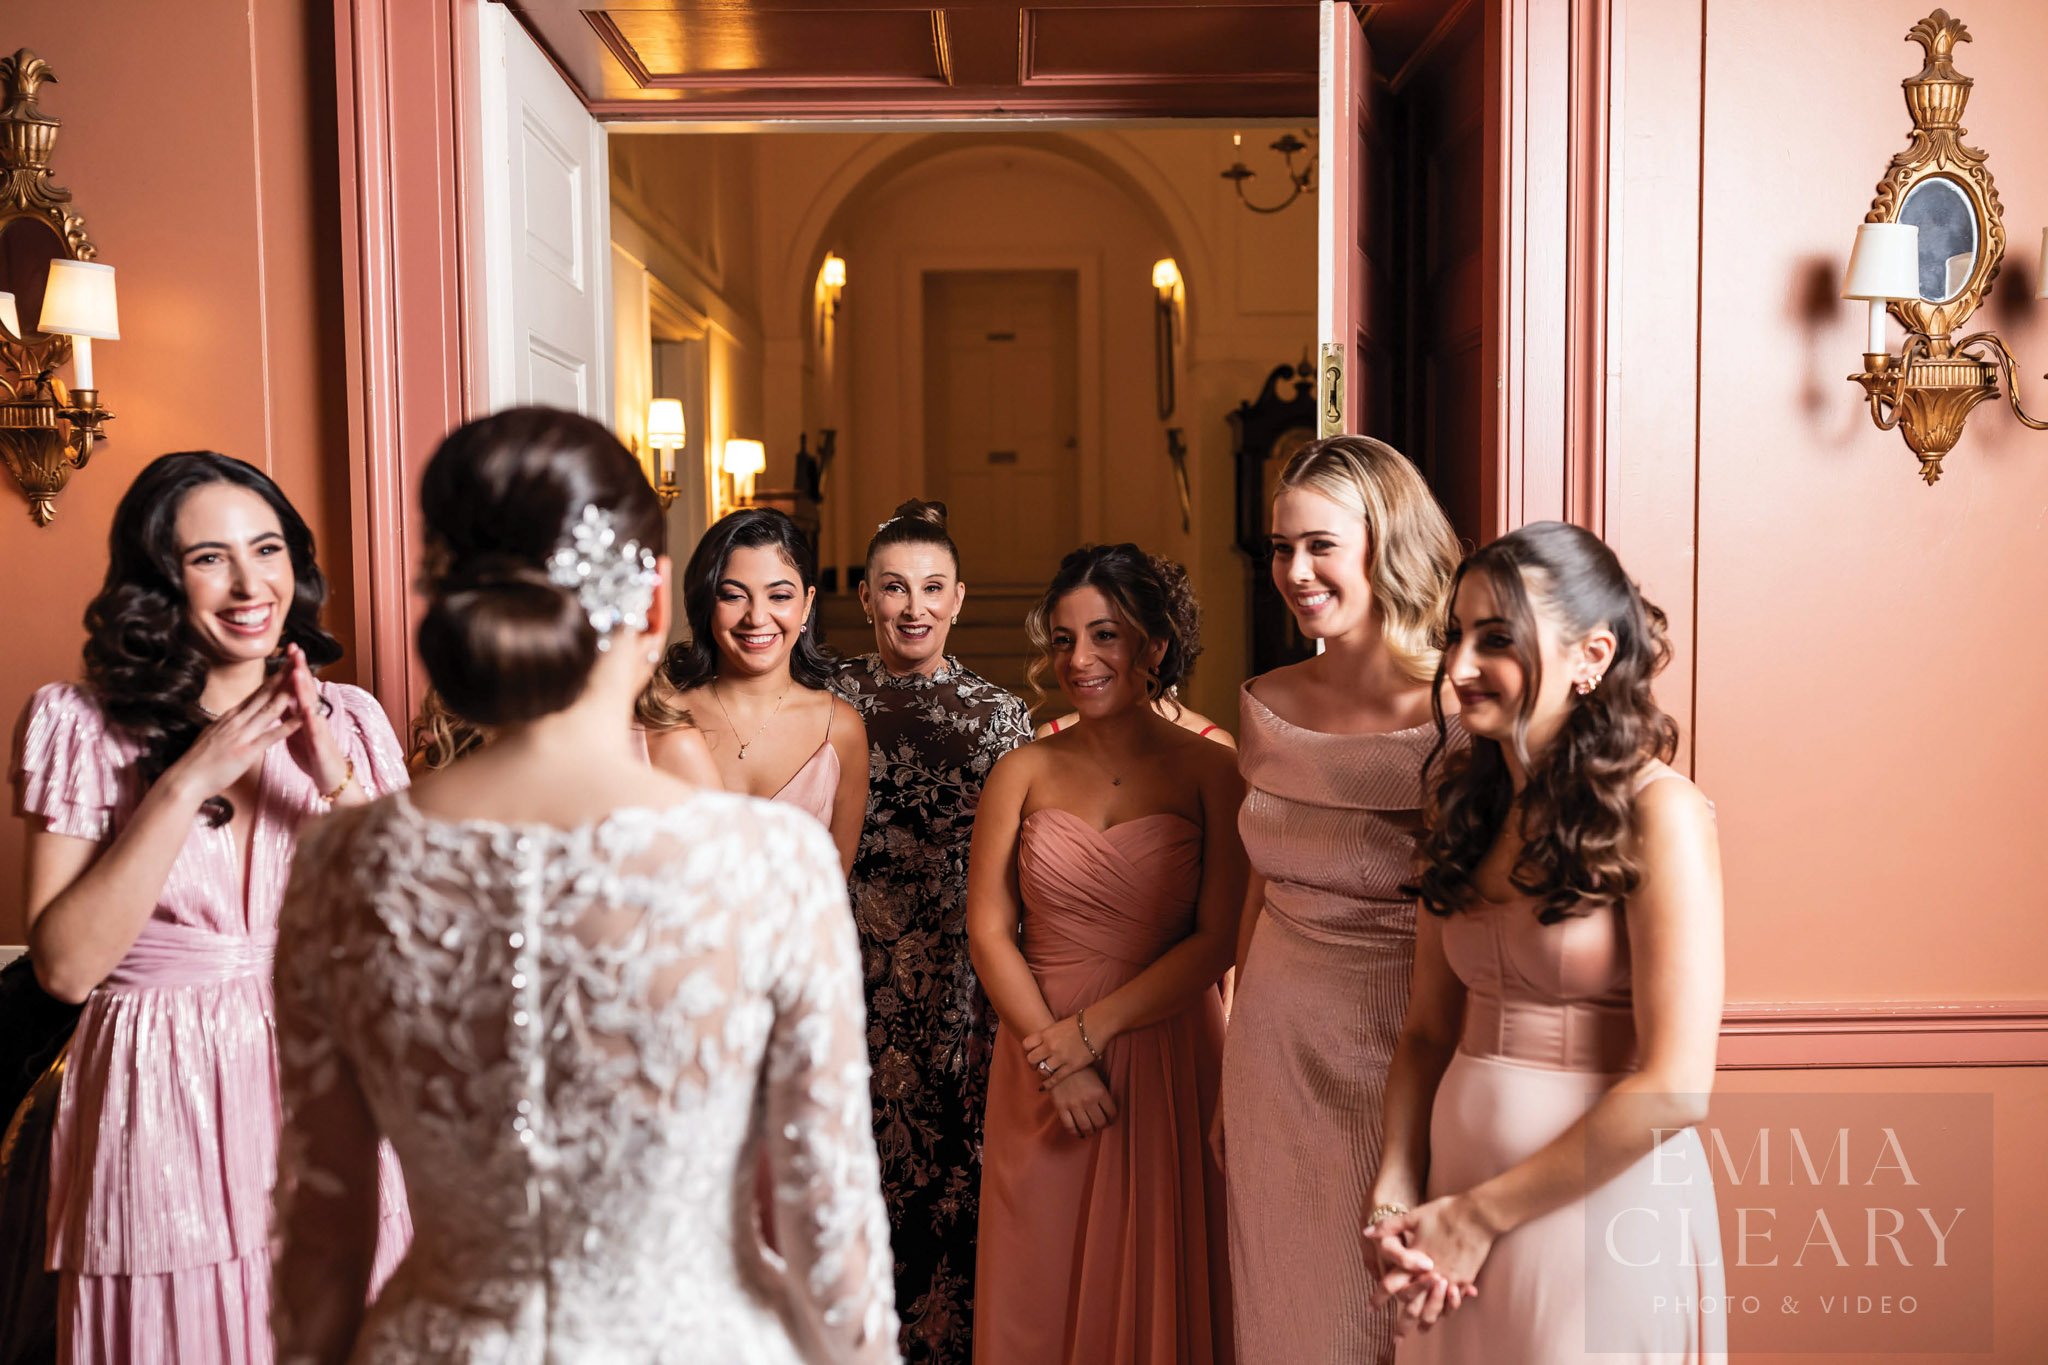 Bridesmades are surprised by the bride